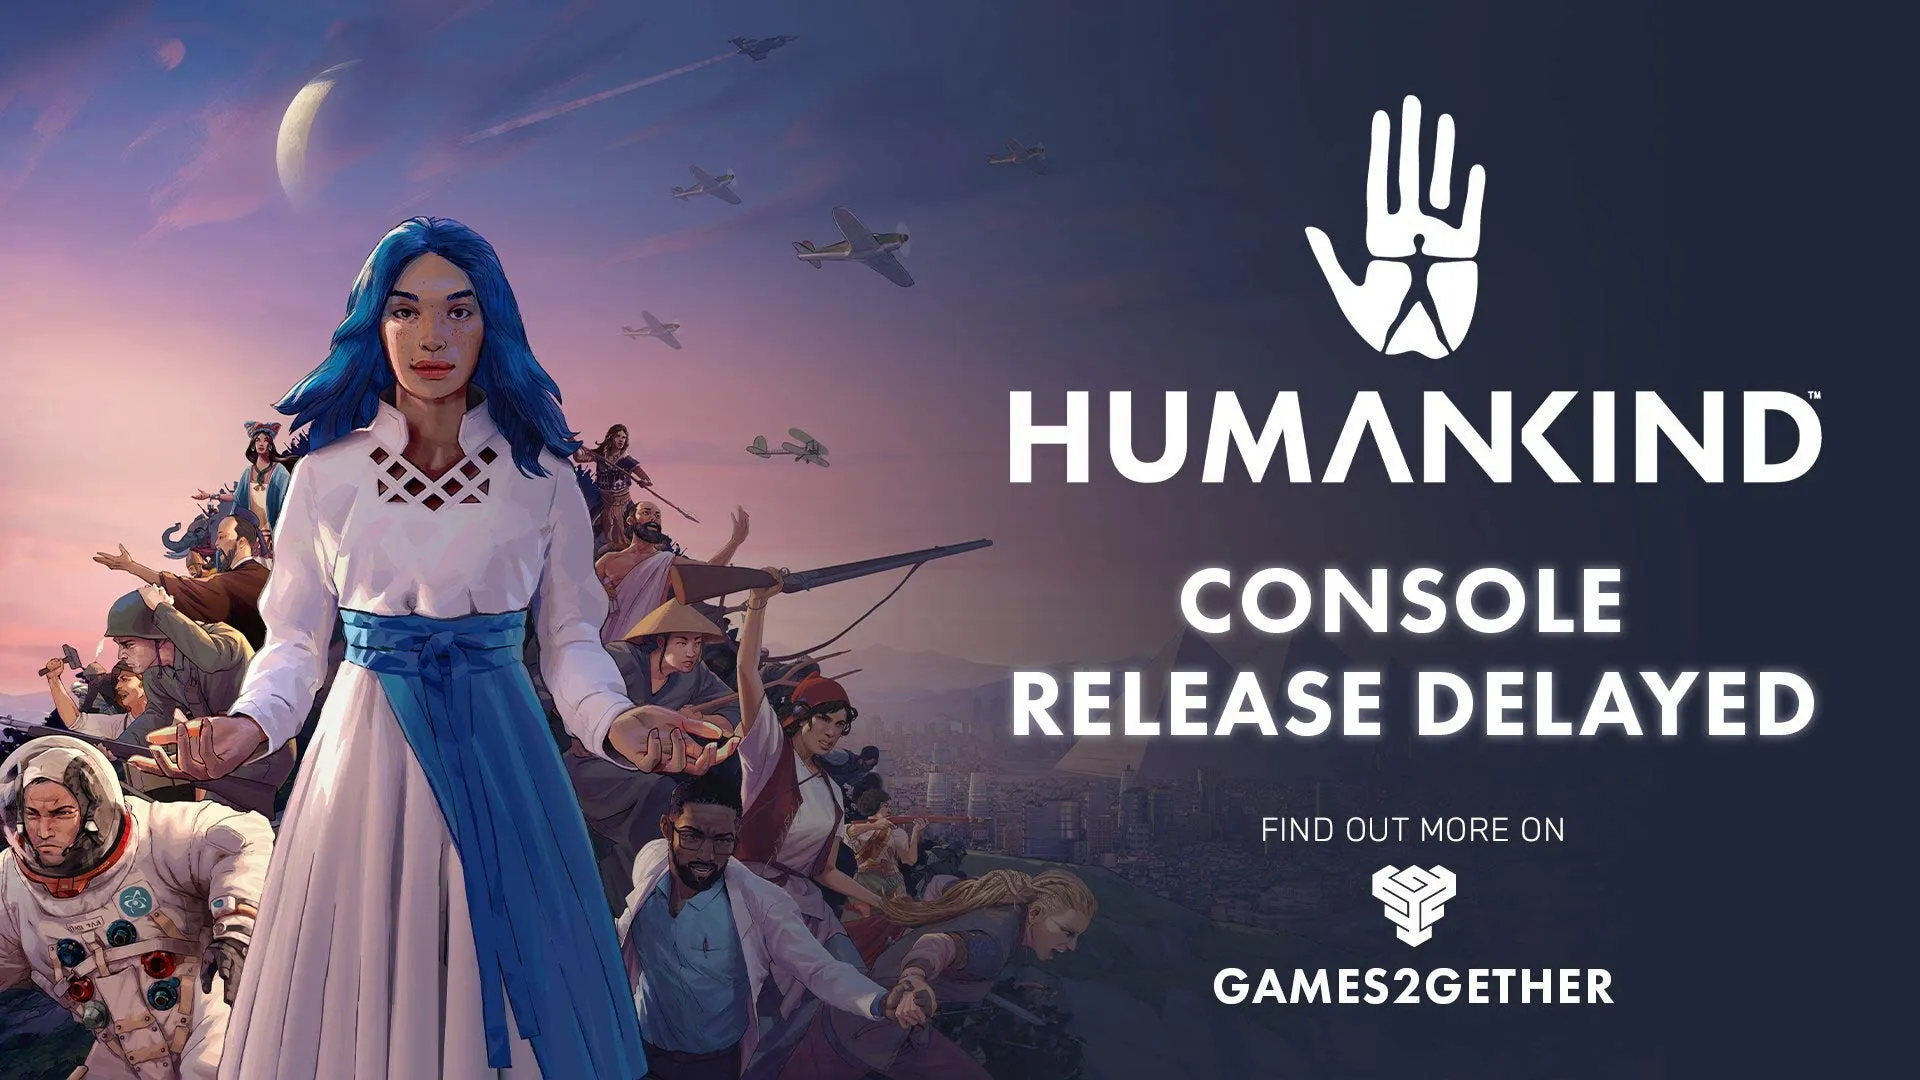 Humankind delayed on consoles